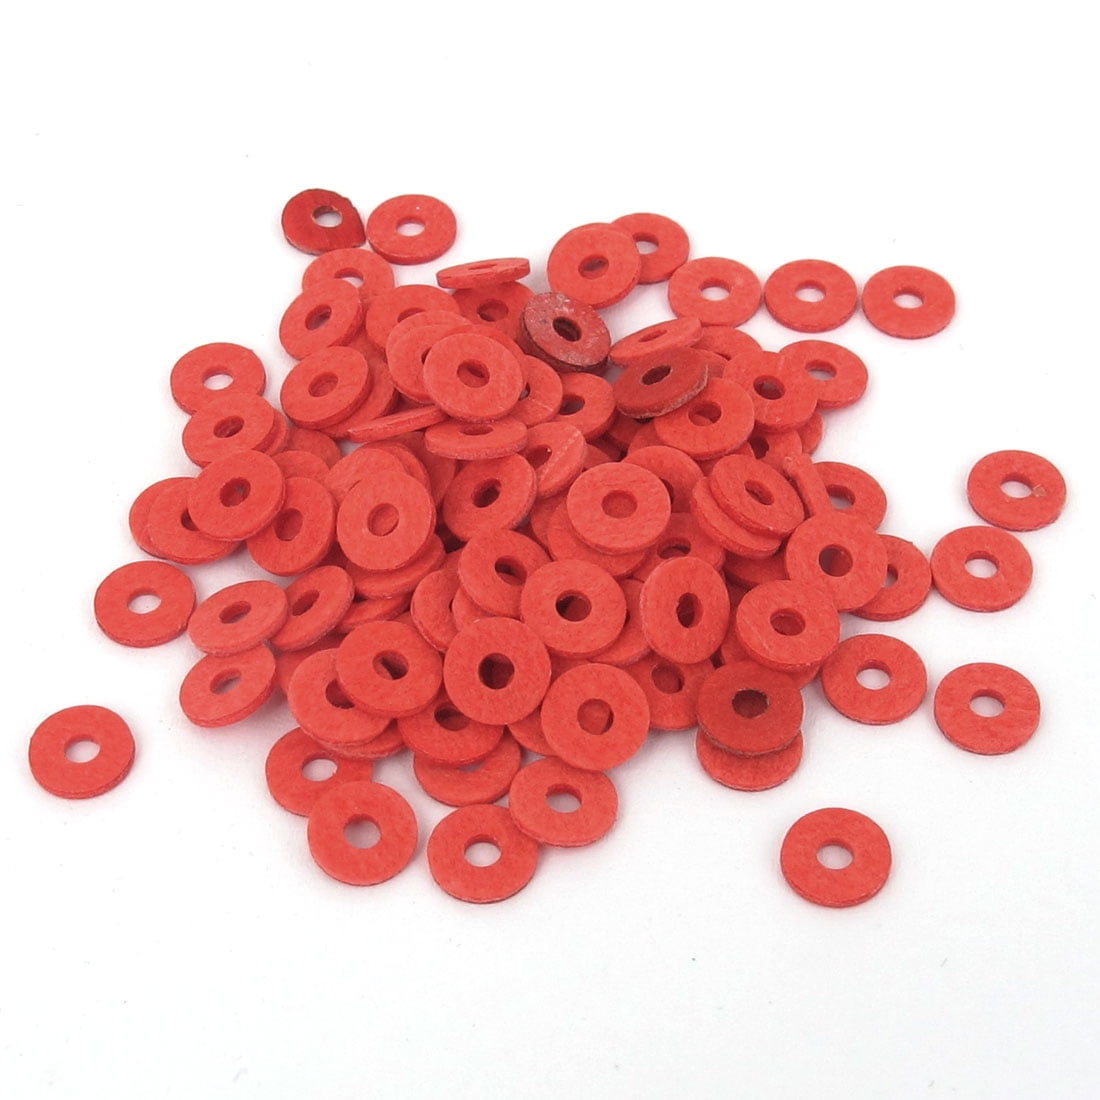 50/100Pcs Red Motherboard Screw Insulating Fiber Washers Metric Flat Washers 